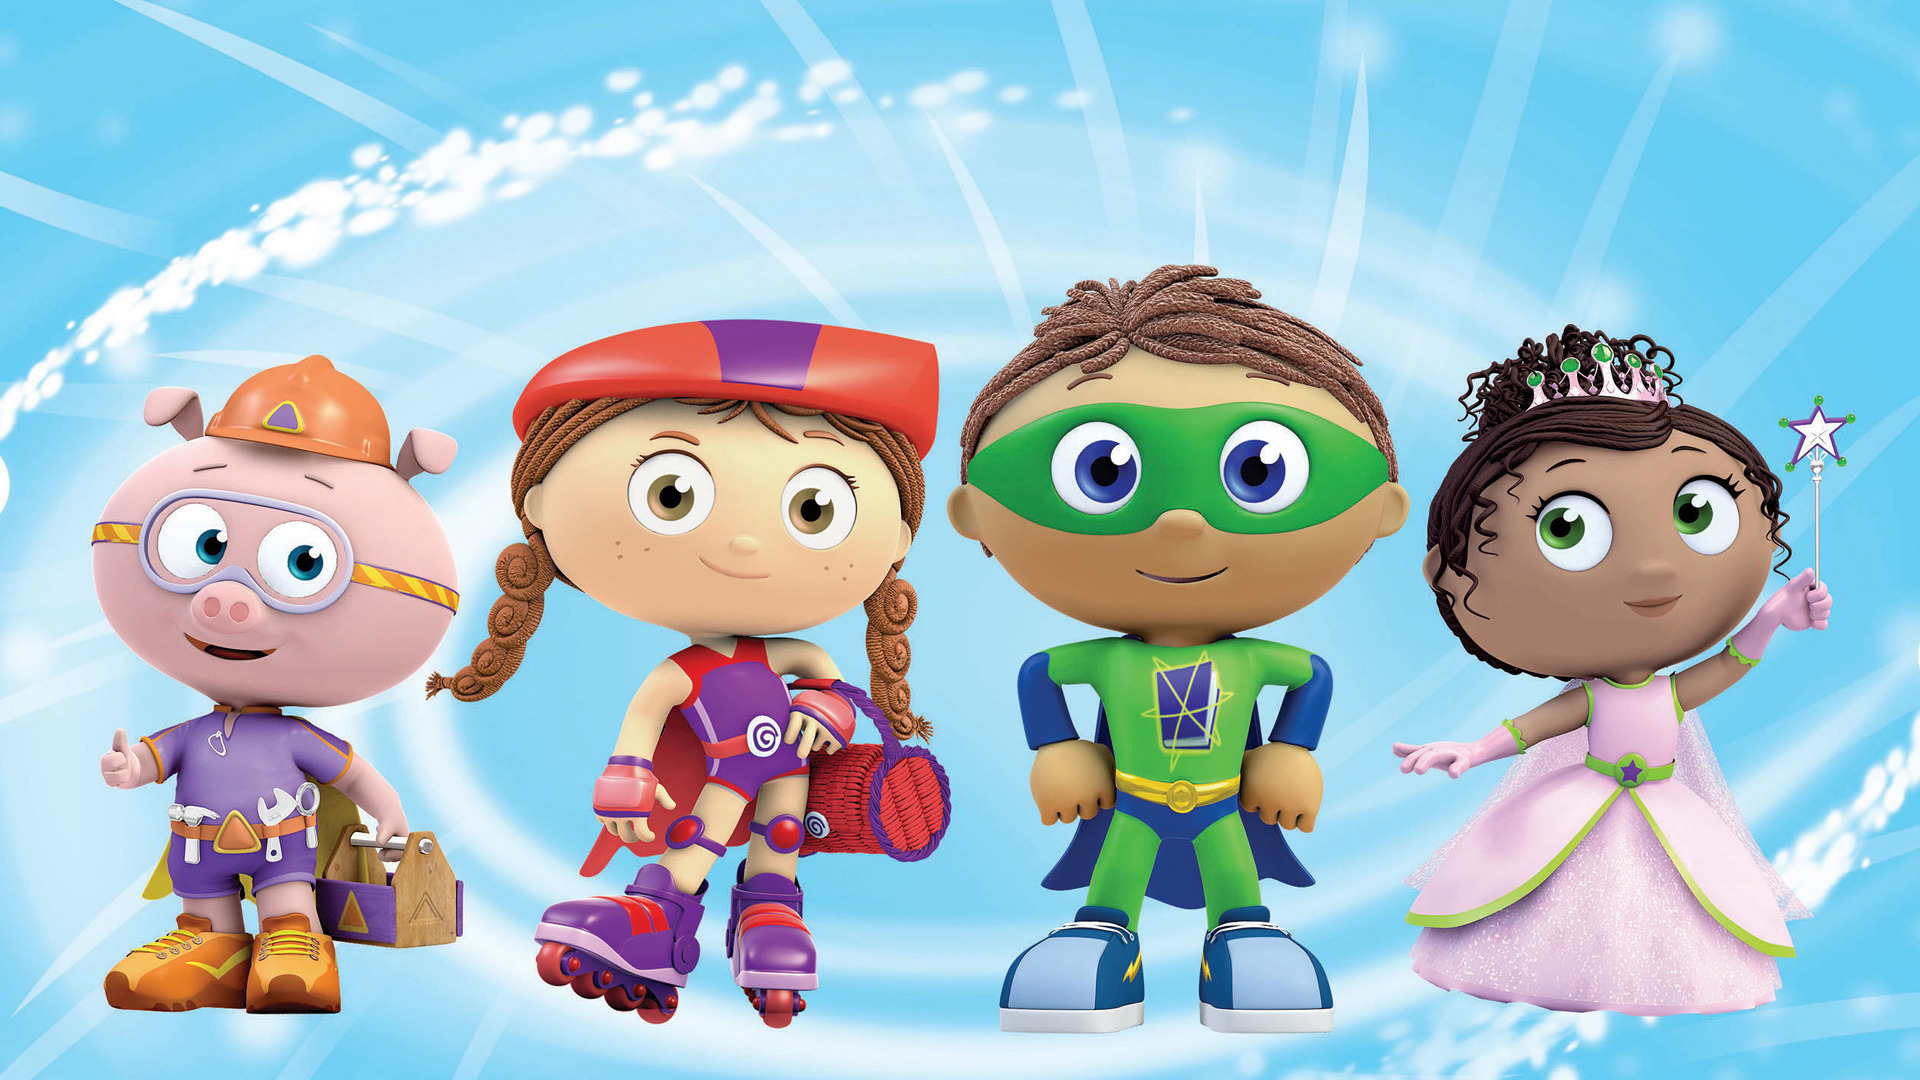 Show Super WHY!